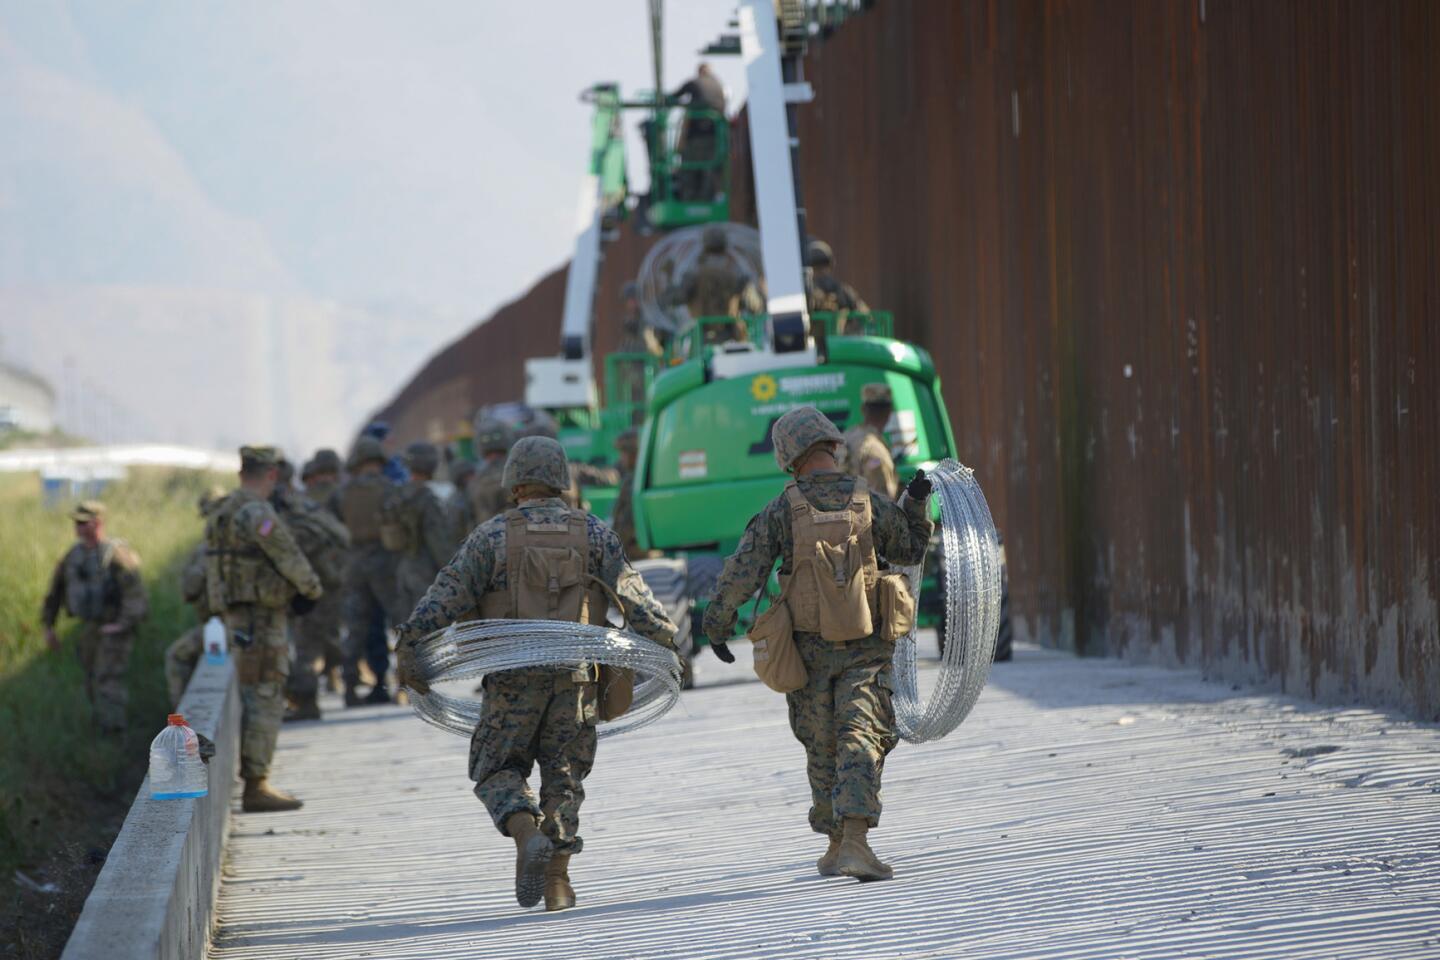 Fortifying the U.S. border along Mexico